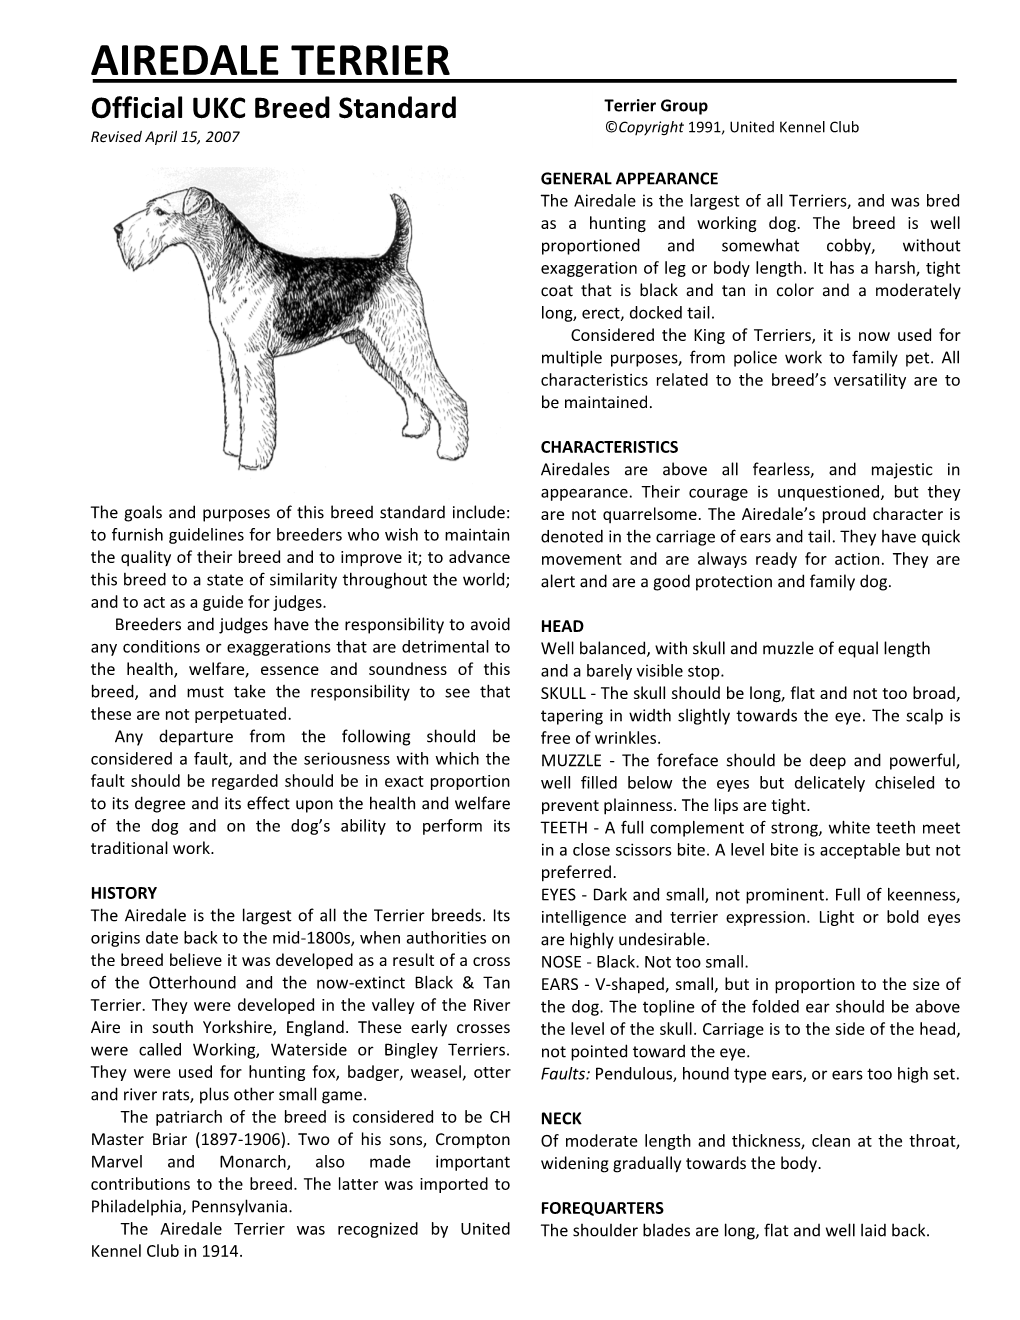 AIREDALE TERRIER Official UKC Breed Standard Terrier Group ©Copyright 1991, United Kennel Club Revised April 15, 2007